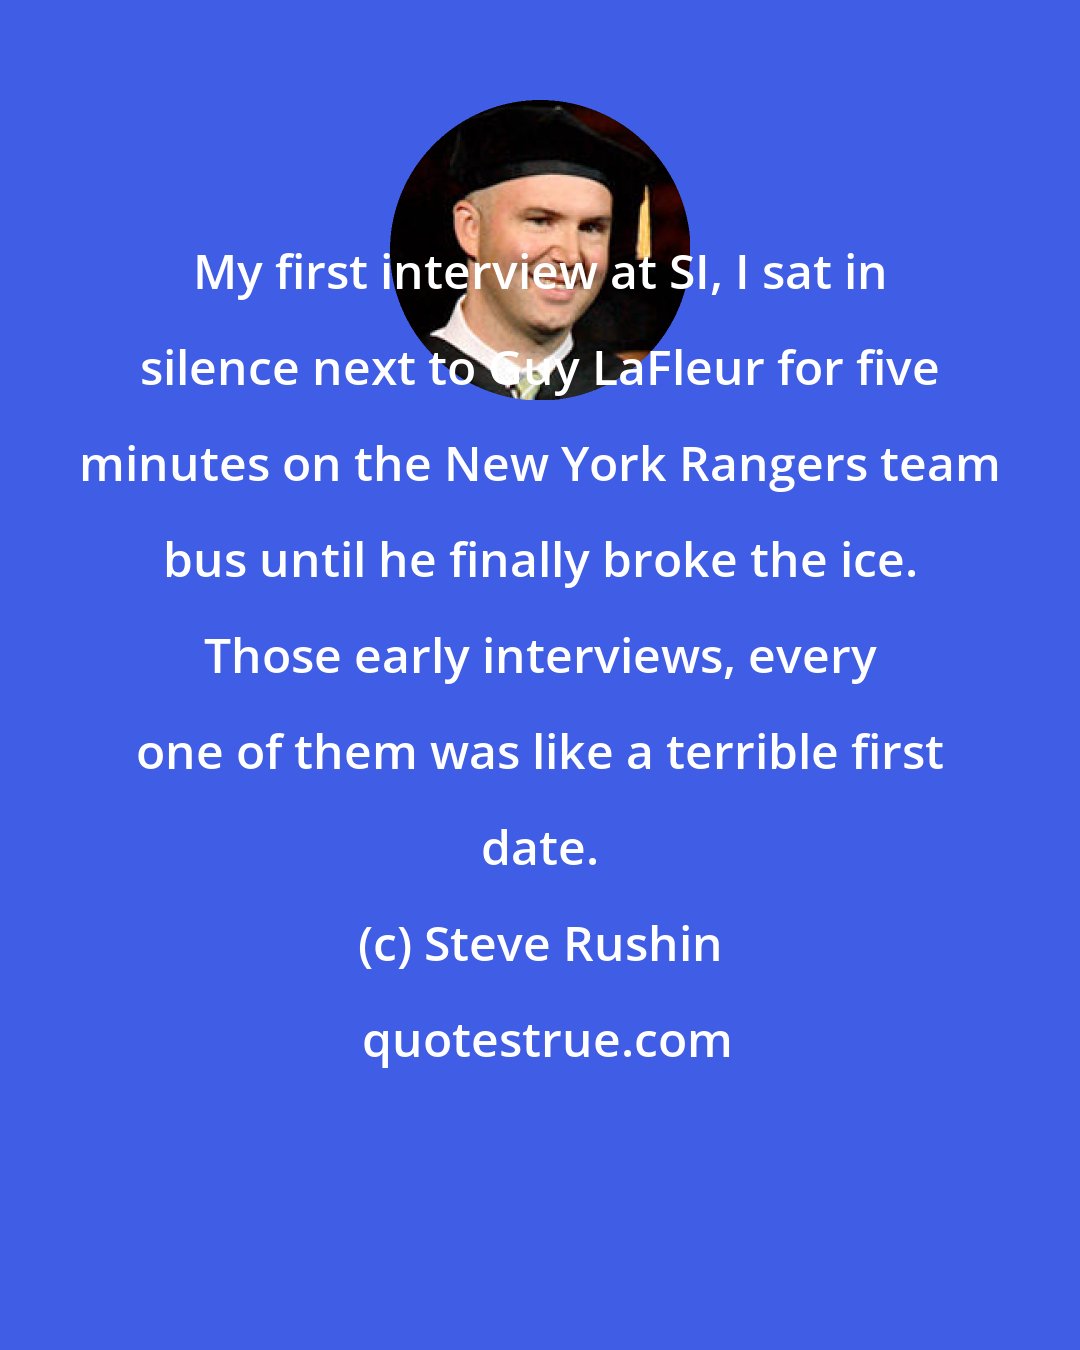 Steve Rushin: My first interview at SI, I sat in silence next to Guy LaFleur for five minutes on the New York Rangers team bus until he finally broke the ice. Those early interviews, every one of them was like a terrible first date.